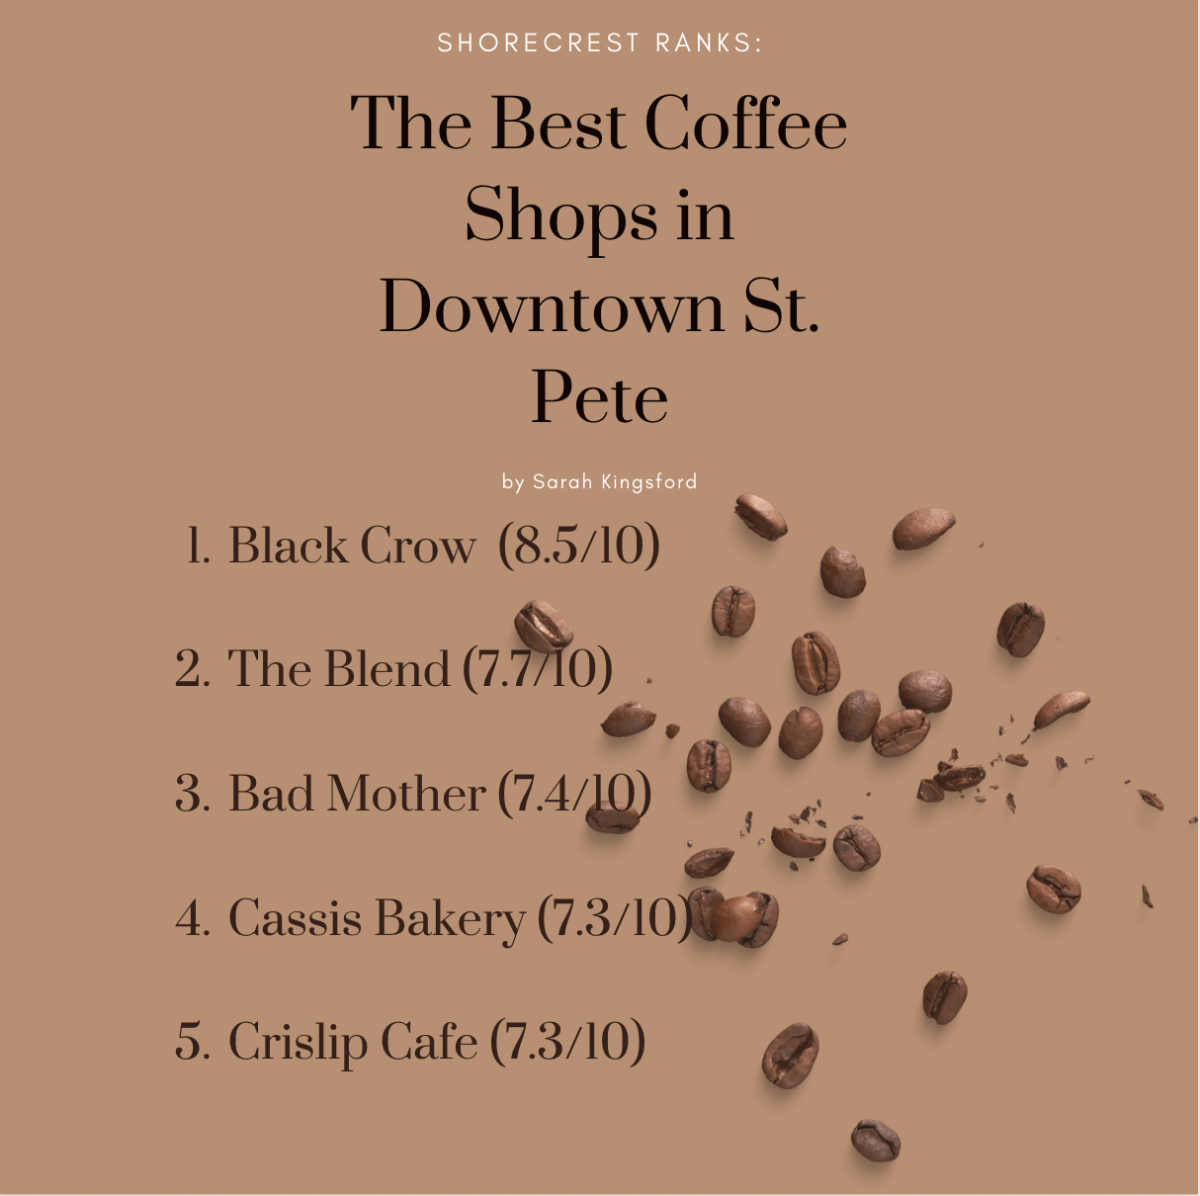 Shorecrest Ranks: The Best Coffee Shops in Downtown St. Pete